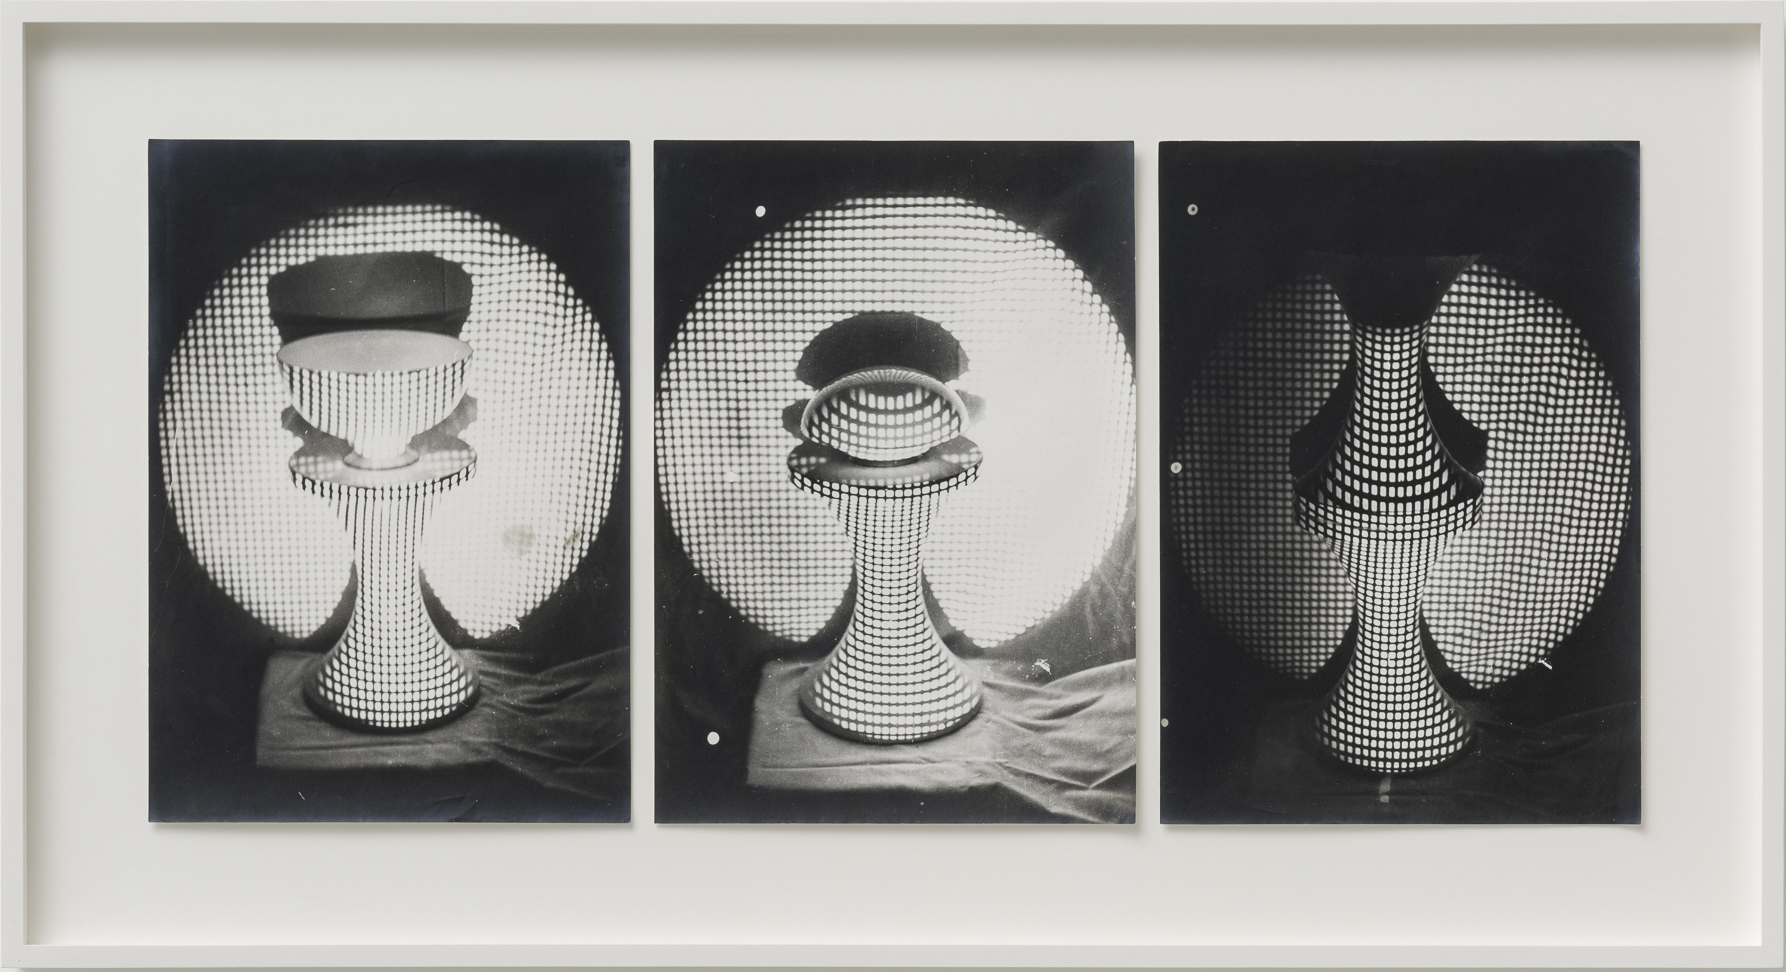 Ferenc Ficzek, Untitled (Chair, bowl, grid) No. 1-3, 1973, series of 3 silver gelatin prints on Dokubrom paper, 41,5 x 76,5 cm (framed). Photo: Marcus Schneider